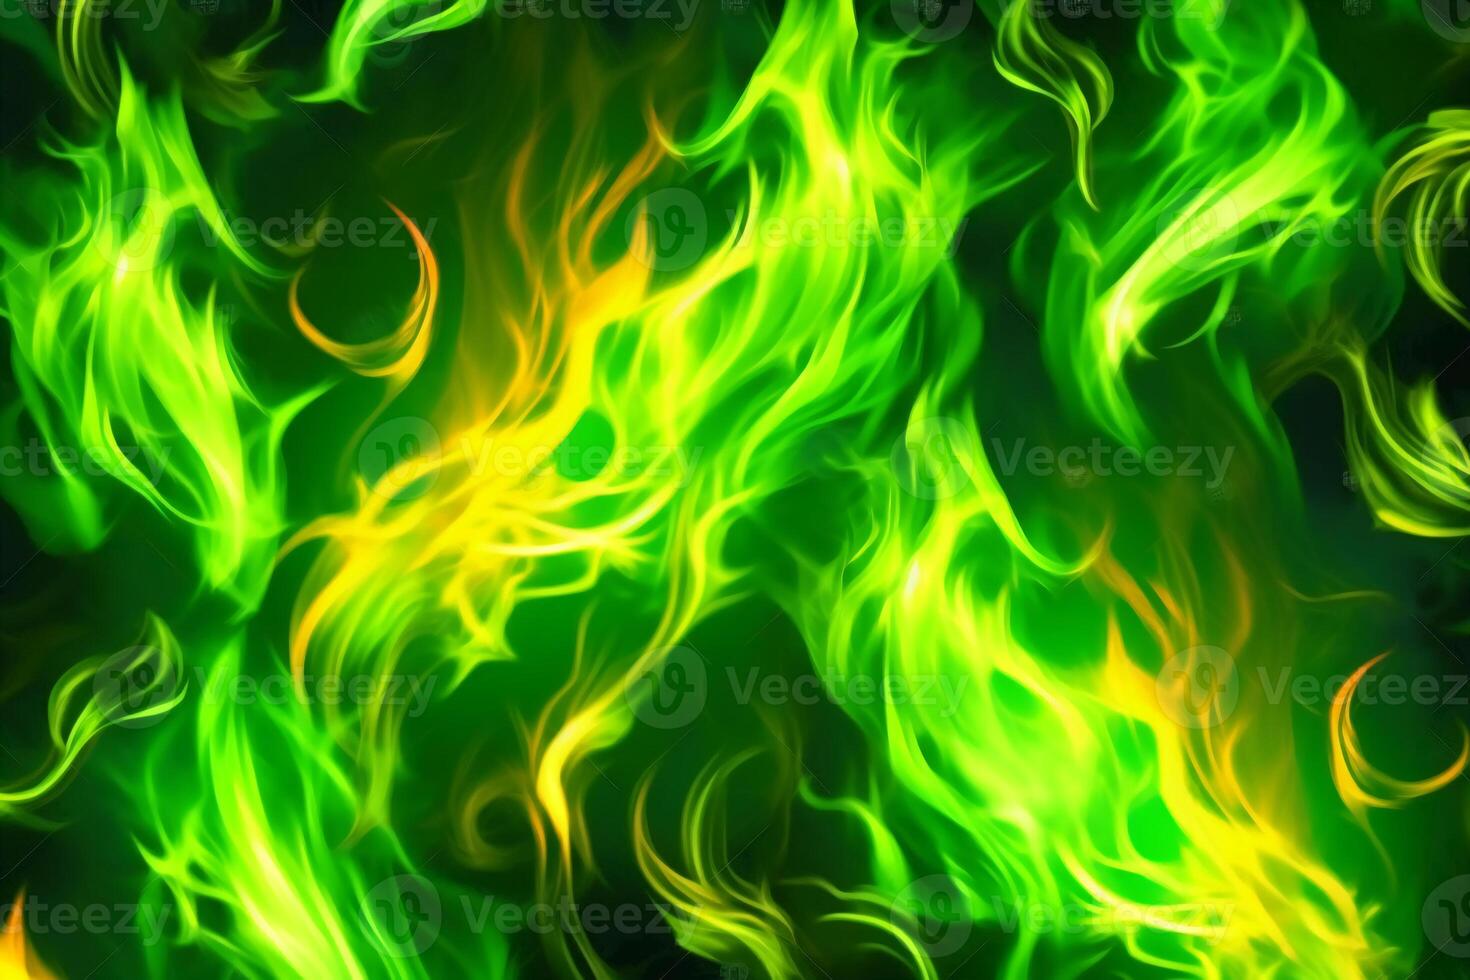 Drawn neon color green, Burning flame background material abstract hand. photo